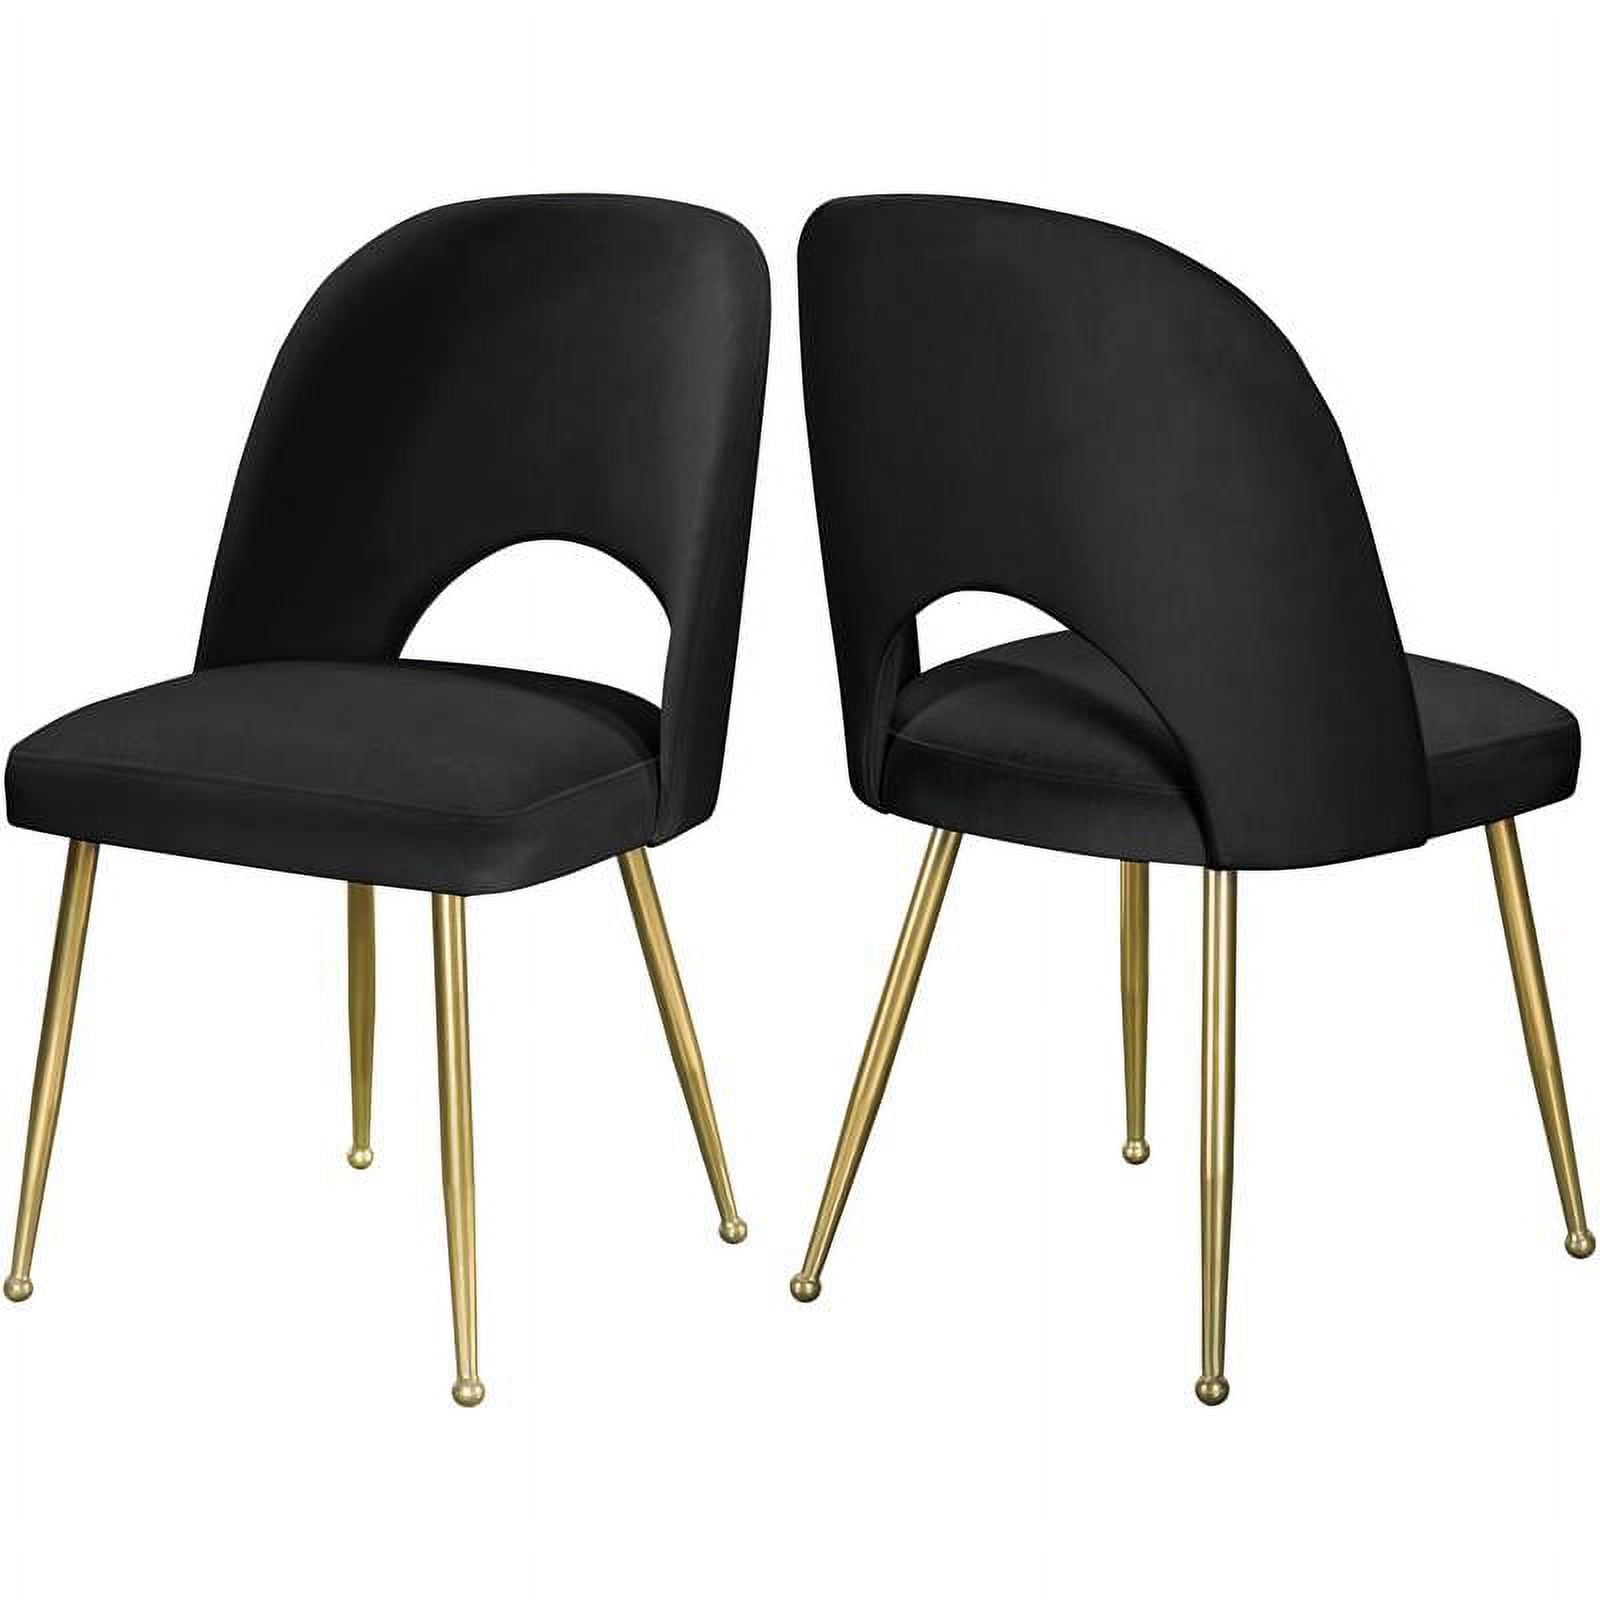 Luxor Black Velvet Dining Chair with Brushed Gold Accents